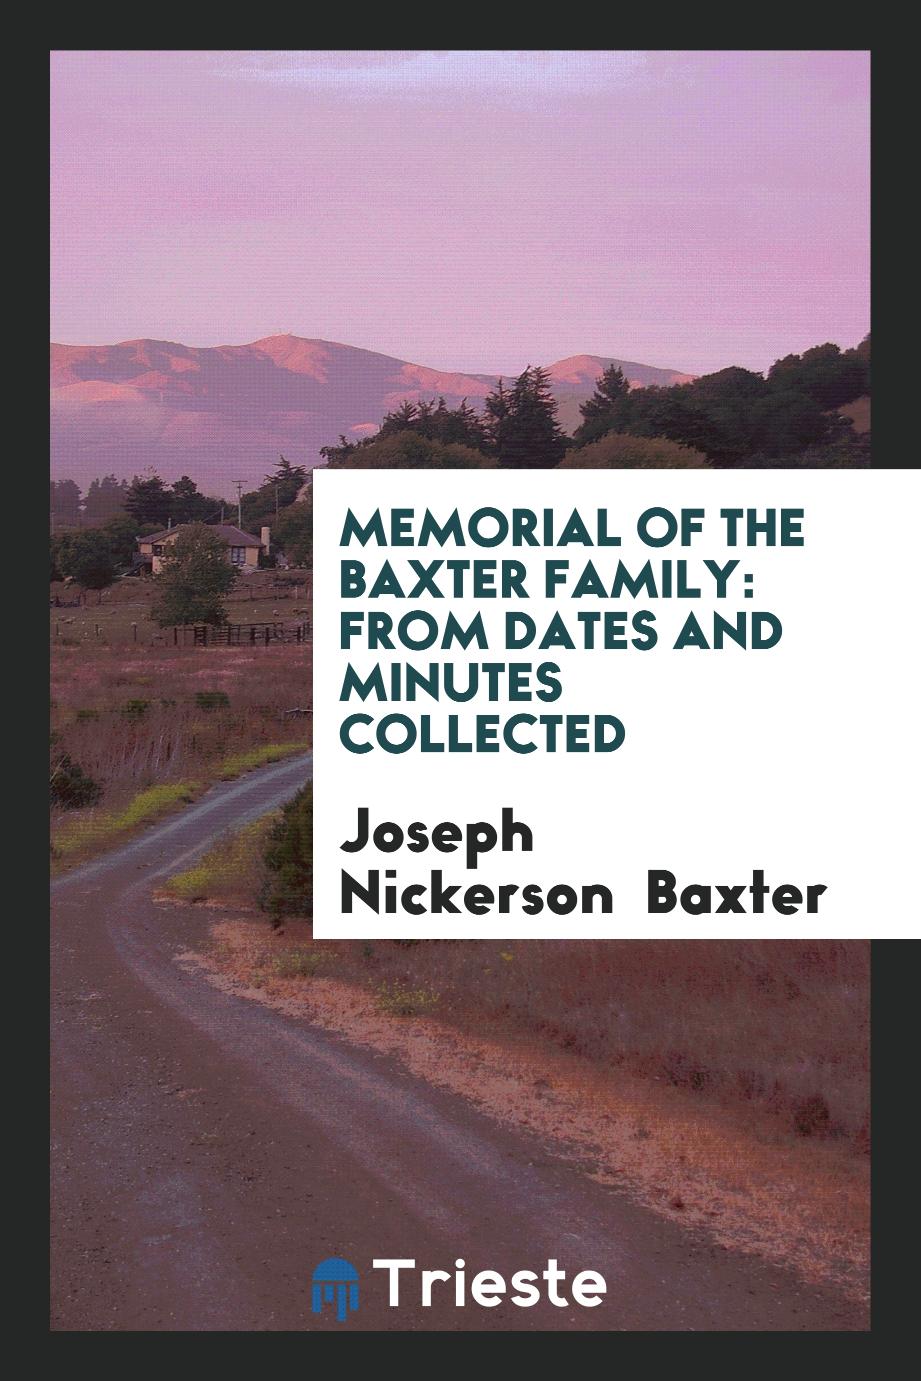 Memorial of the Baxter Family: From Dates and Minutes Collected